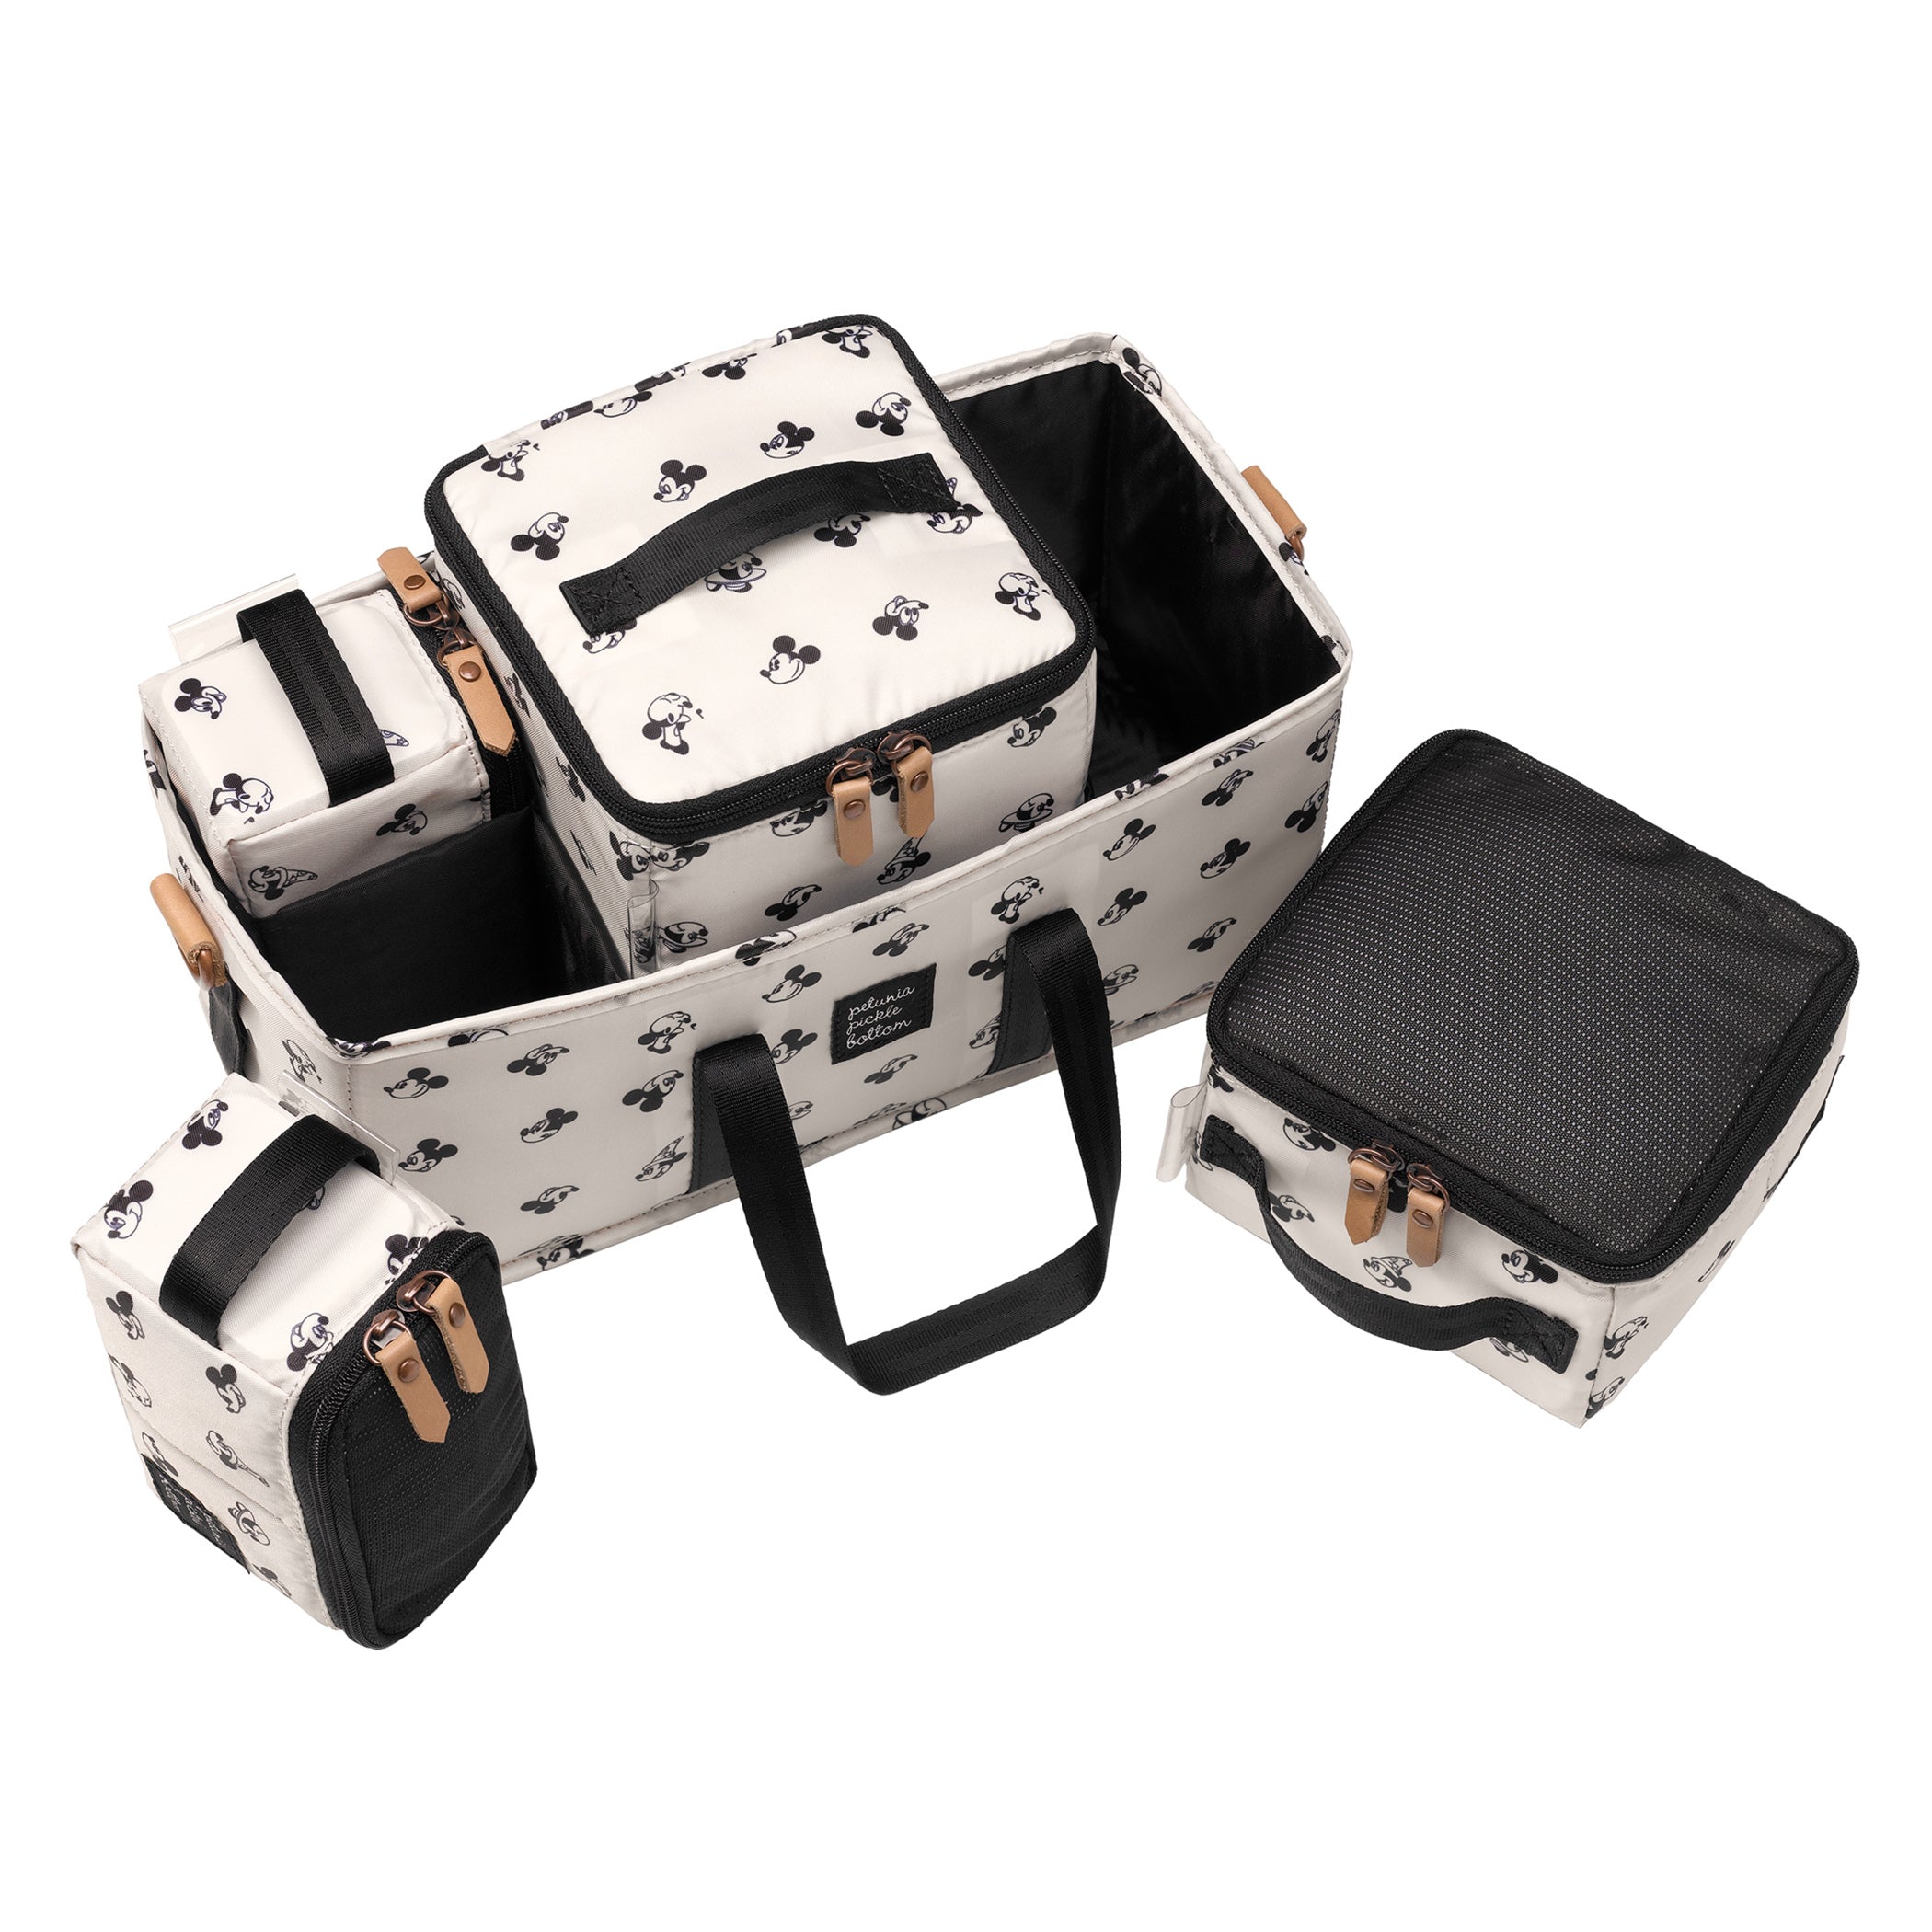 Petunia Pickle Bottom Inter-Mix Deluxe Kit in Mickey Mouse Diaper Caddie